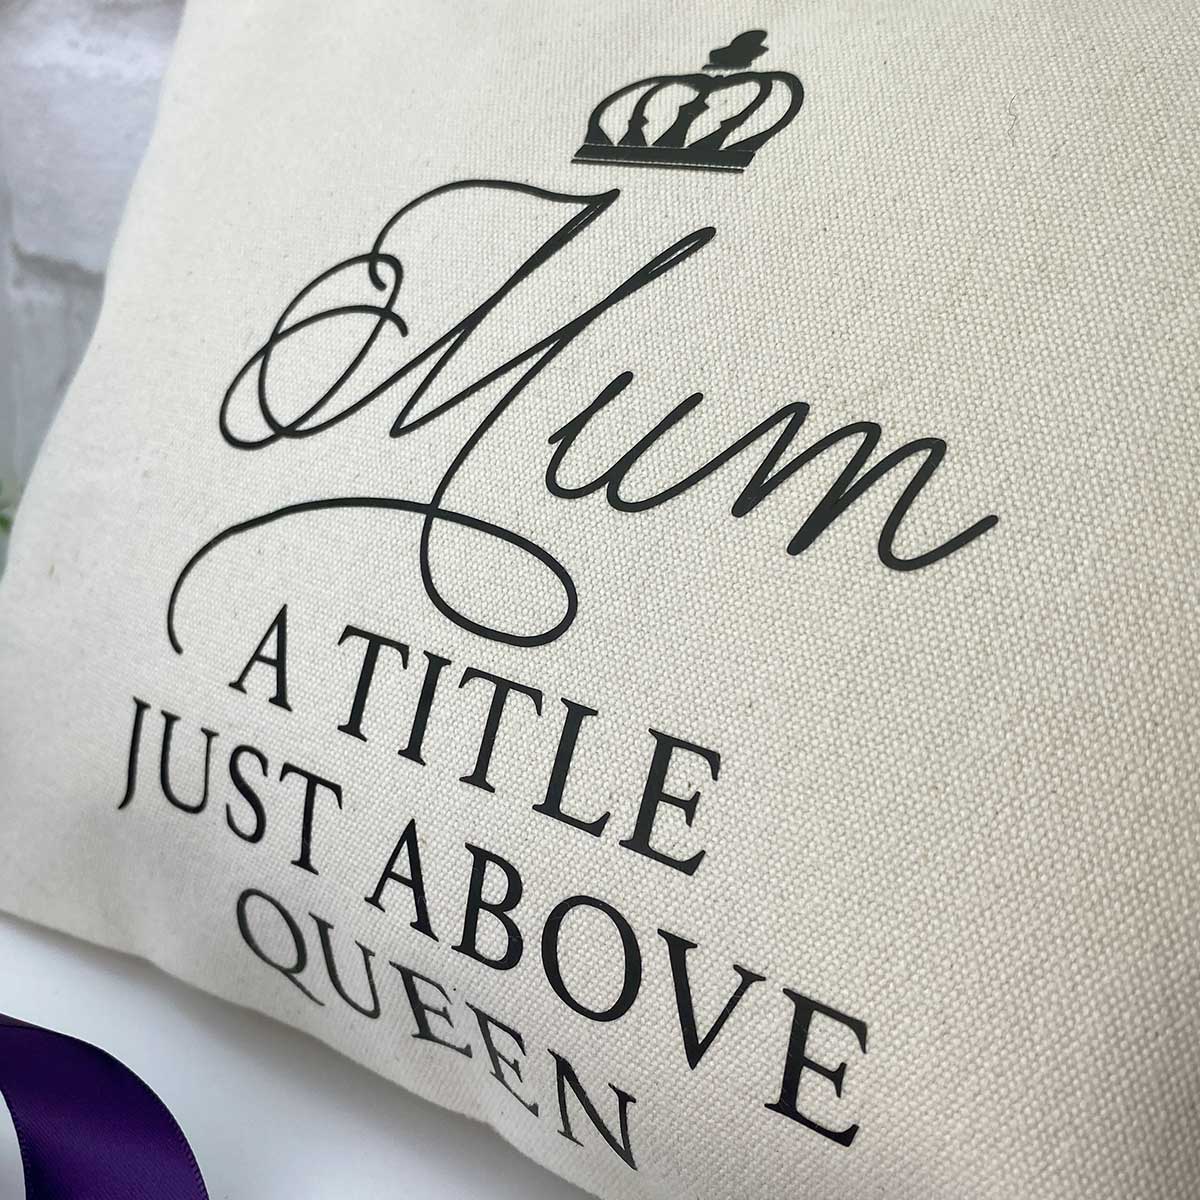 Mum A Title Just Above Queen Accessory Bag (Black or Natural)